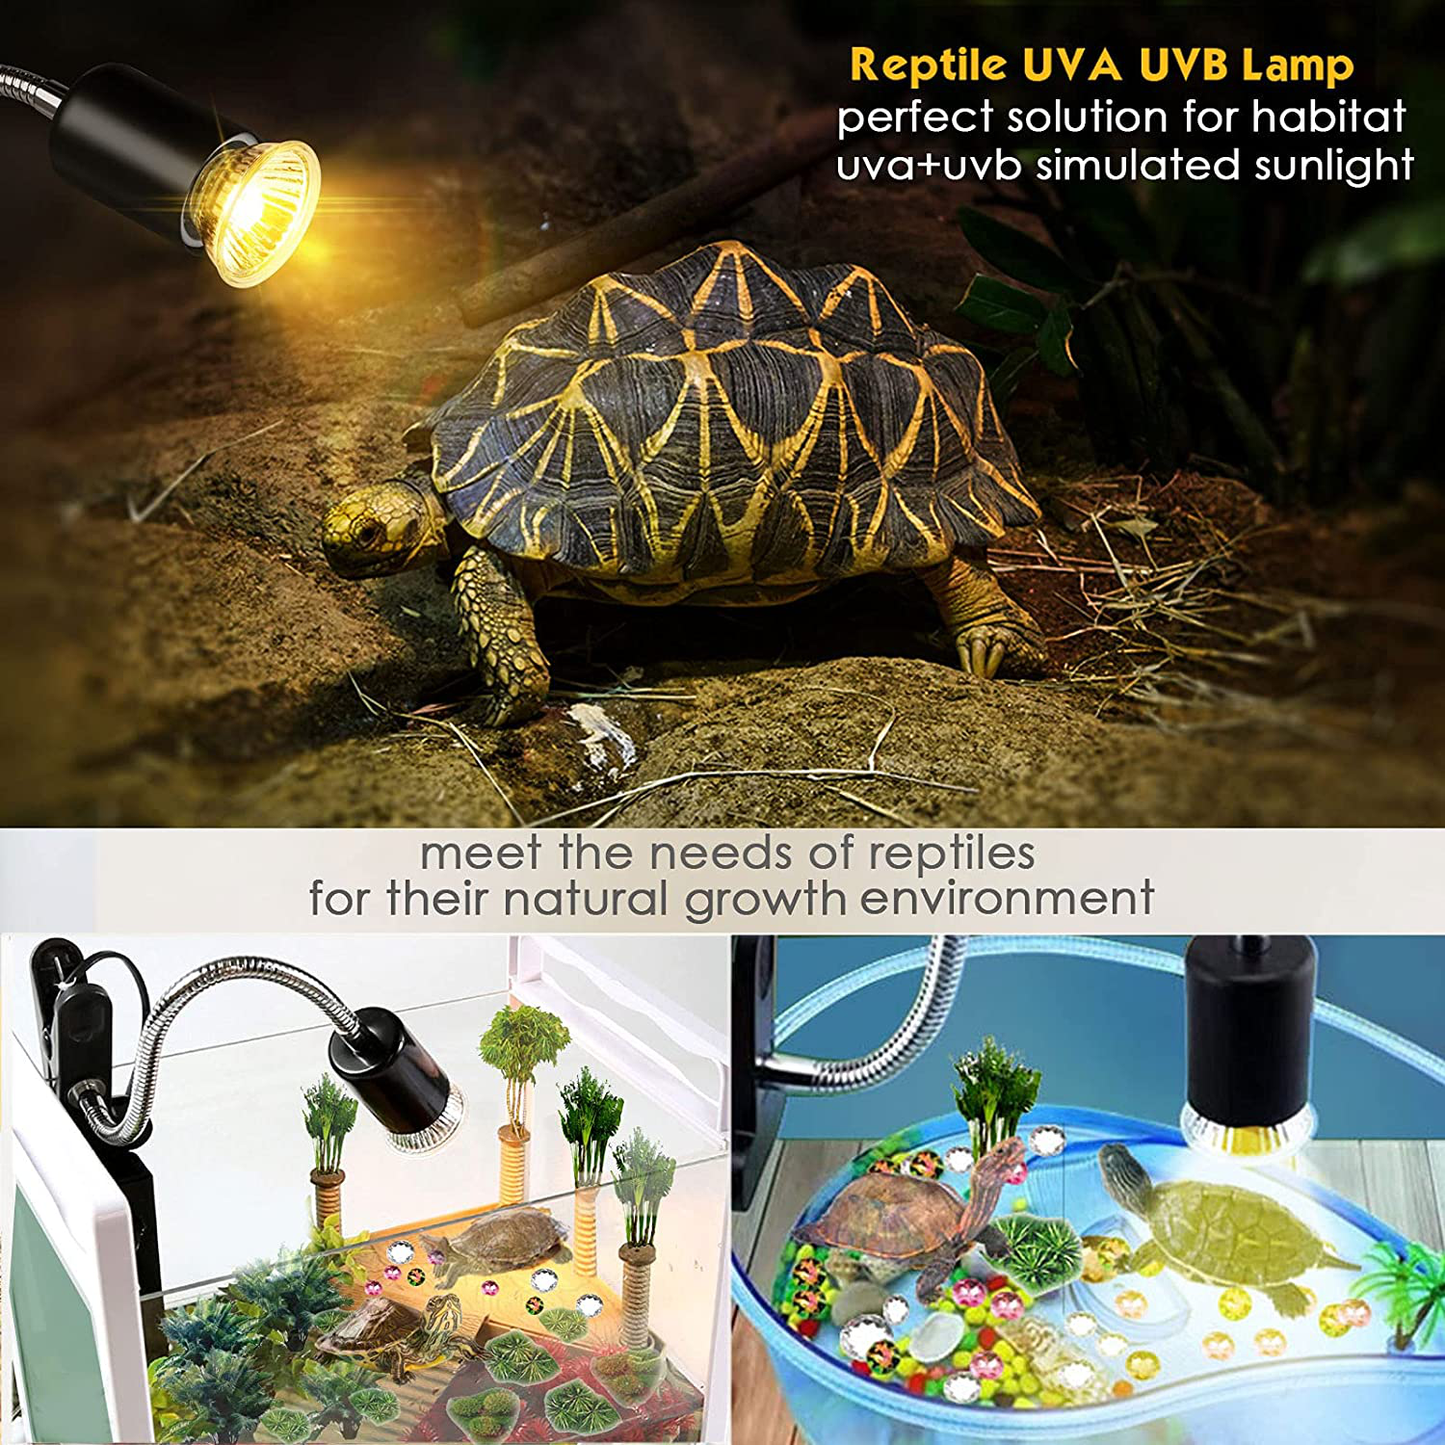 Jomddems Reptile Heat Lamp,Uvb Reptile Light with Holder&Switch,Uva UVB Reptile Lamp with Fixture for Lizard Turtle Snake Amphibian&Aquariaum(3Bulbs Included)(E27,110V)